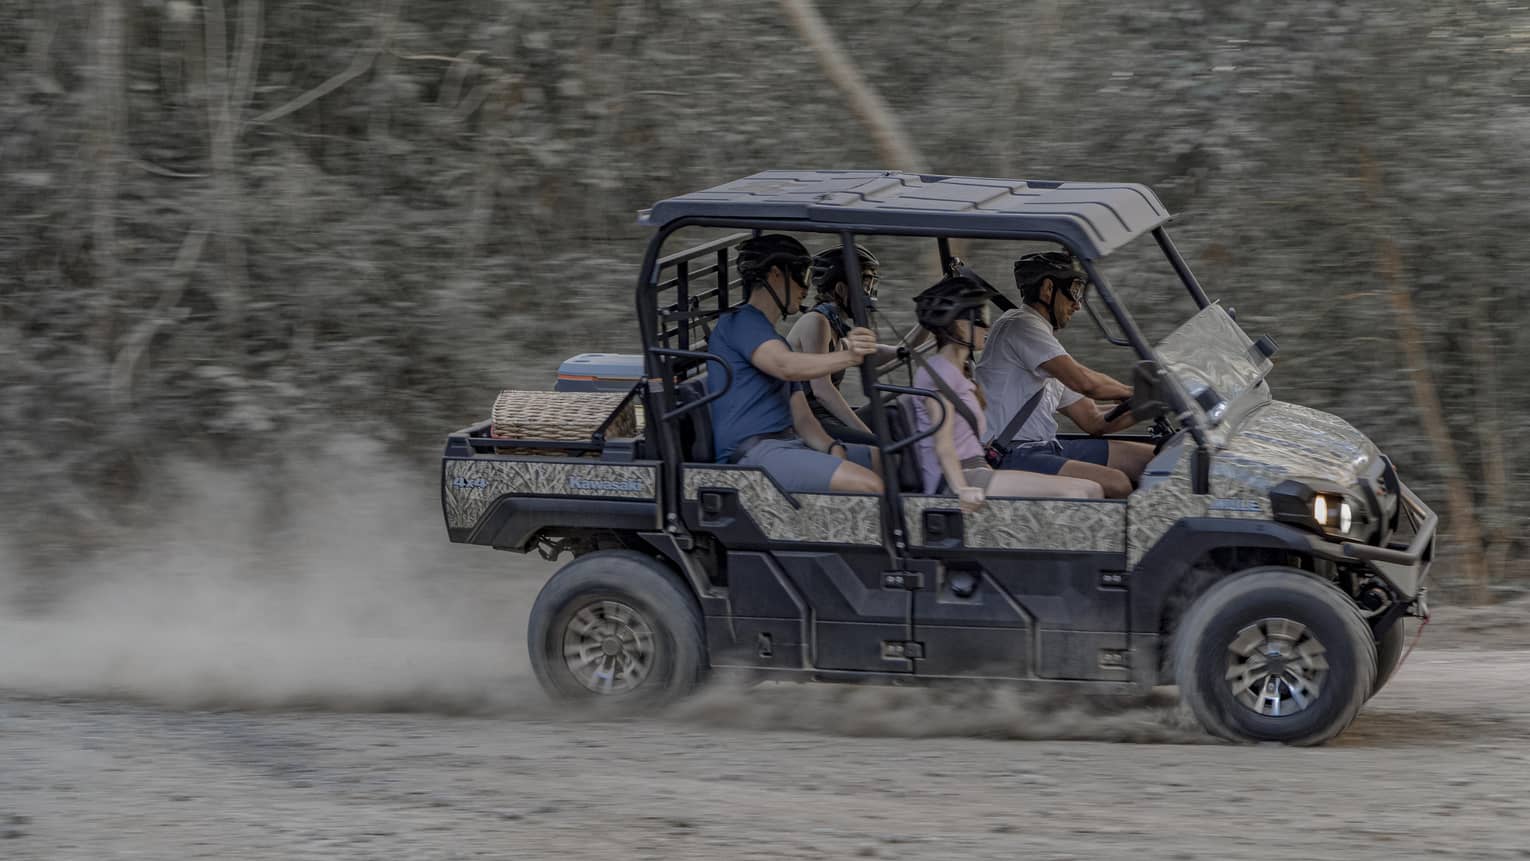 Four people speed along a dirt road in a 4x4 vehicle